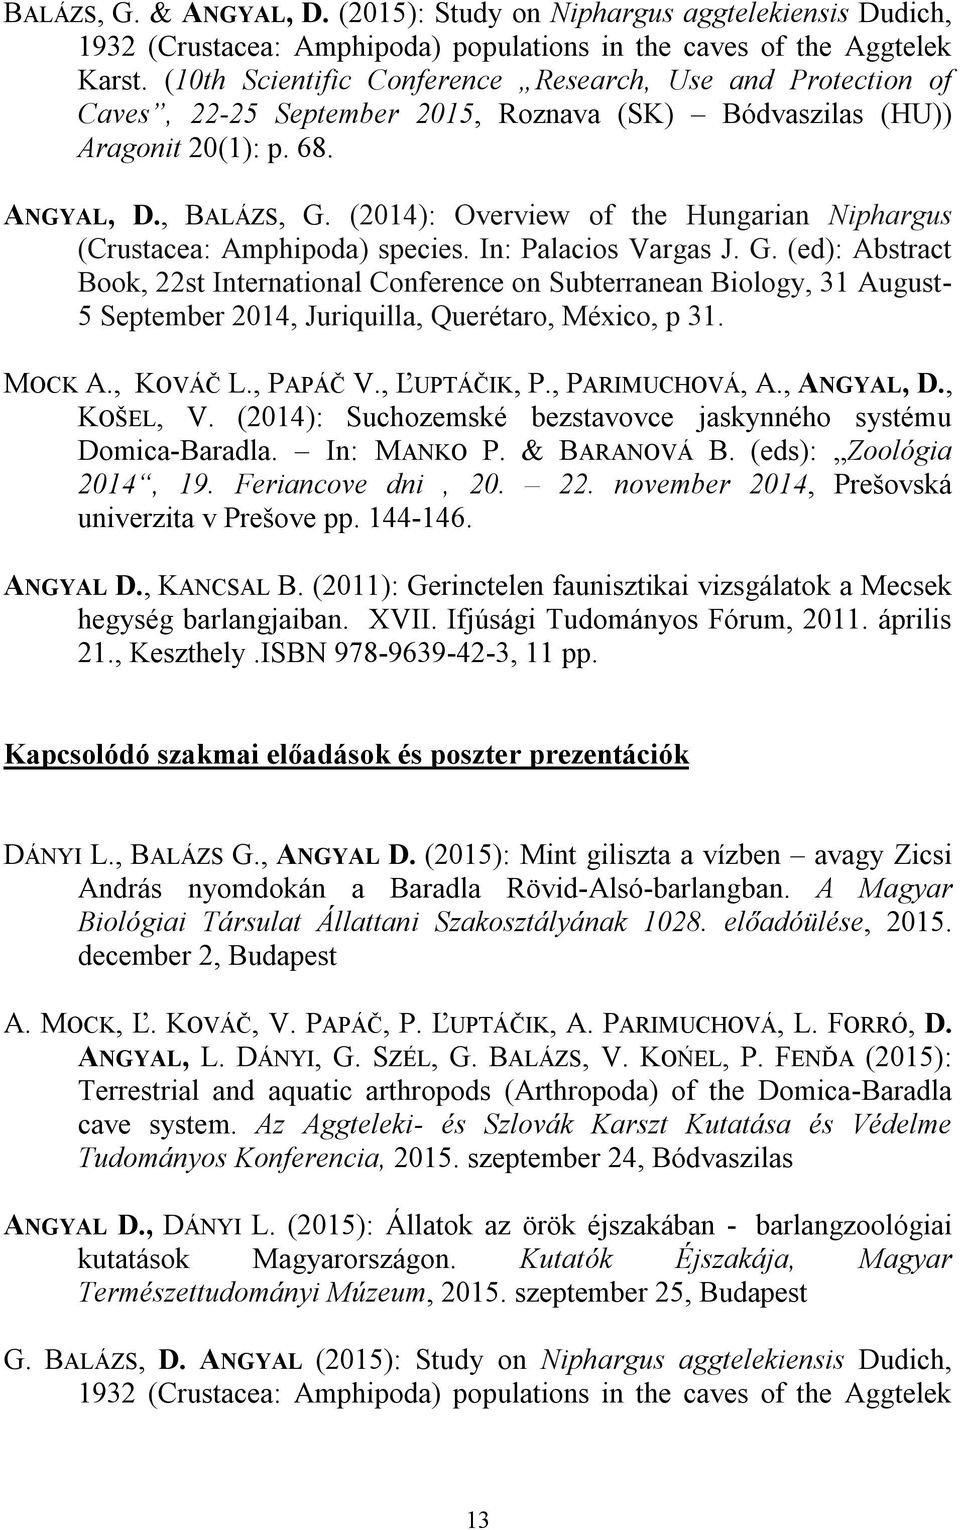 (2014): Overview of the Hungarian Niphargus (Crustacea: Amphipoda) species. In: Palacios Vargas J. G.